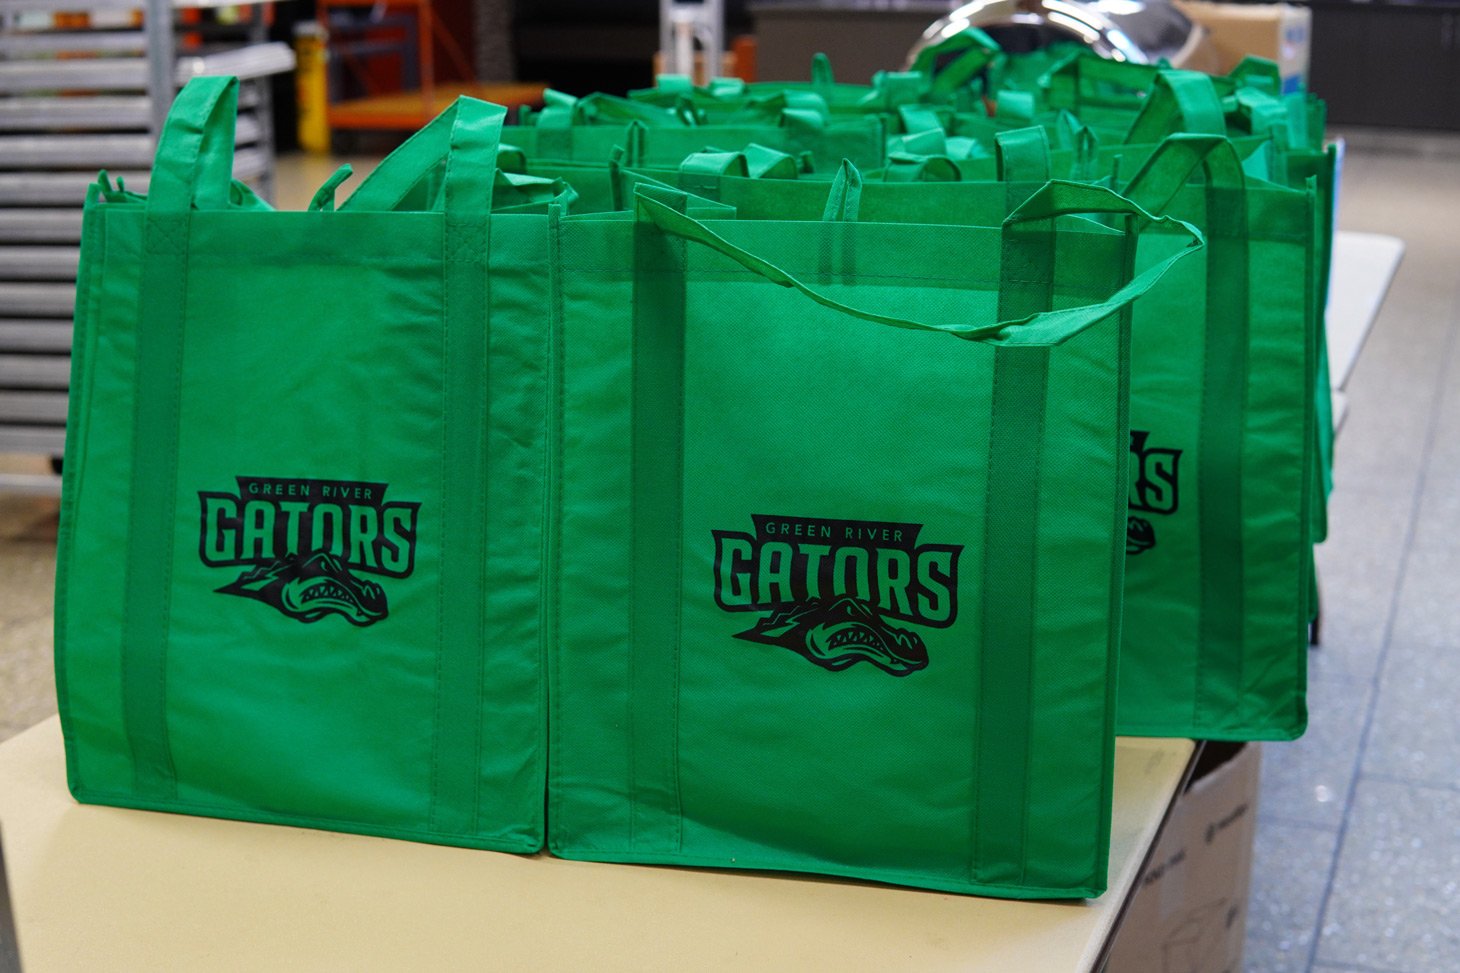 Each household received their meals in GRC tote bags